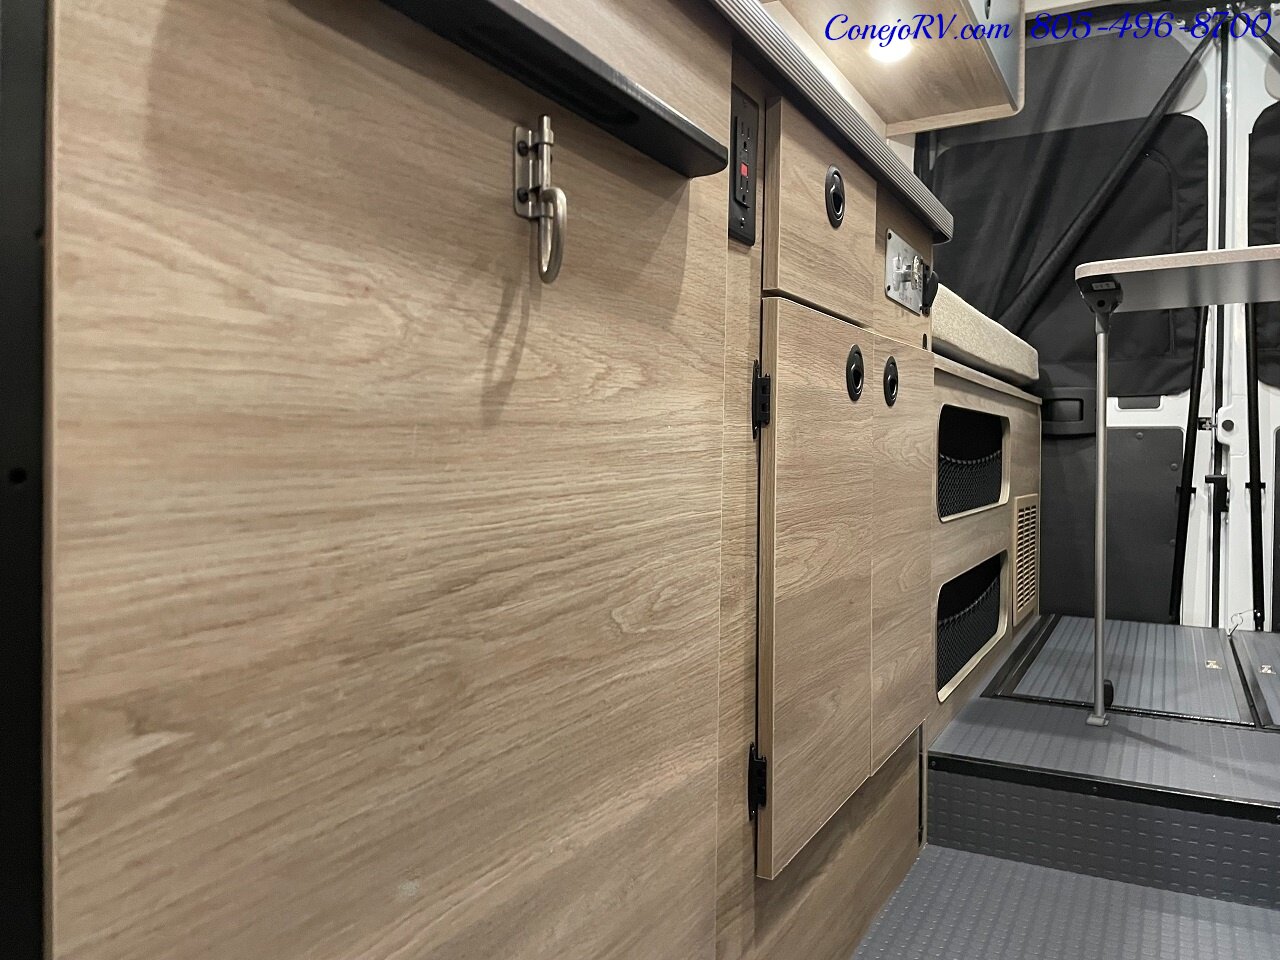 2023 WINNEBAGO Solis 59P Murphy Bed Pop Top Full Galley New Chassis  Adaptive Cruise - Photo 13 - Thousand Oaks, CA 91360